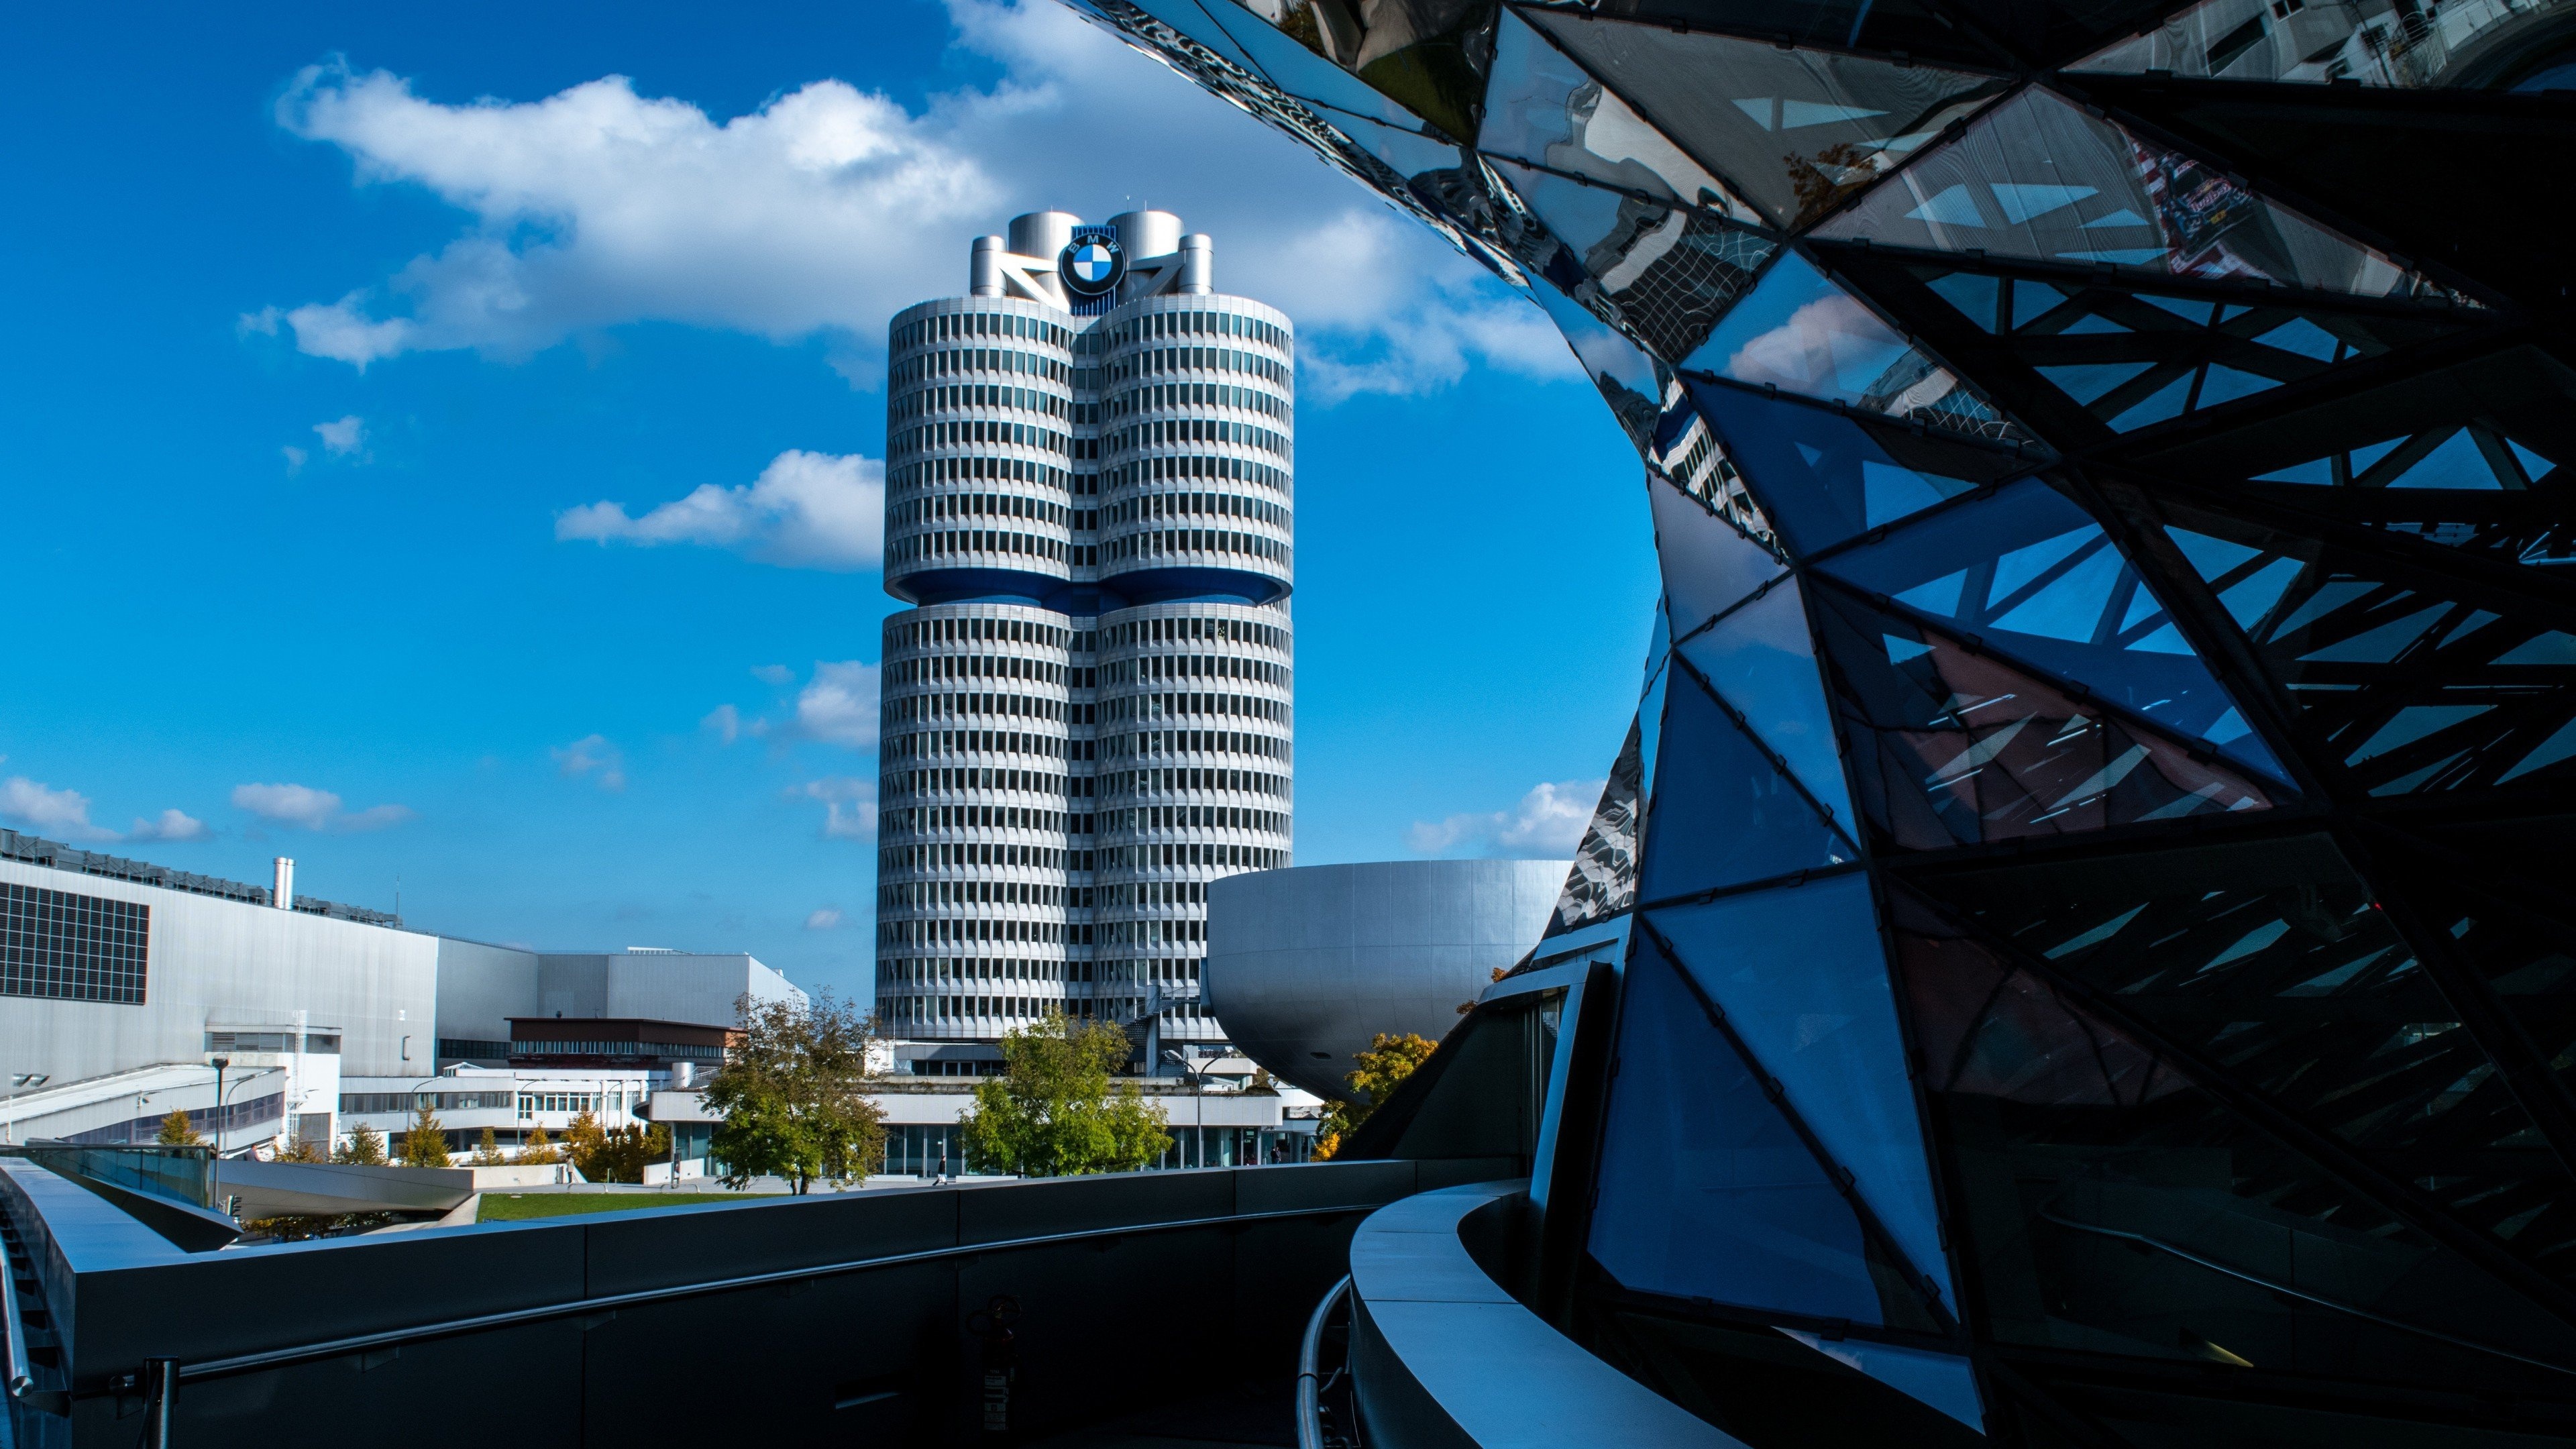 Munich: The third-largest city in Germany, Building, BMW Museum. 3840x2160 4K Background.